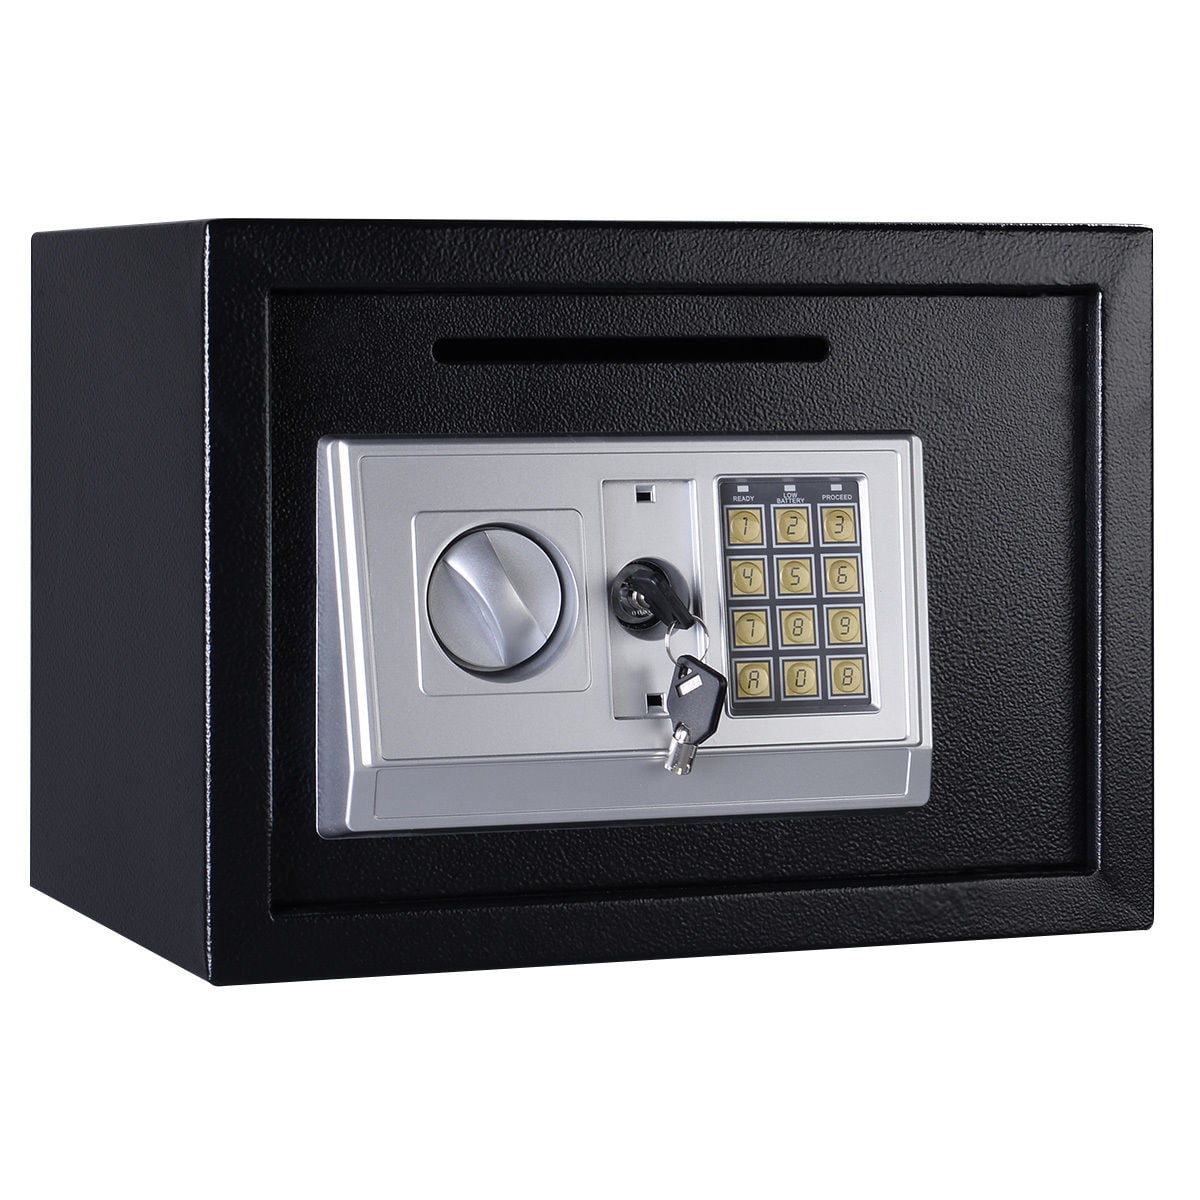 Fire Proof Electronic Wall Safe Lock Hidden Cash Jewelry Small Guns Key Security 